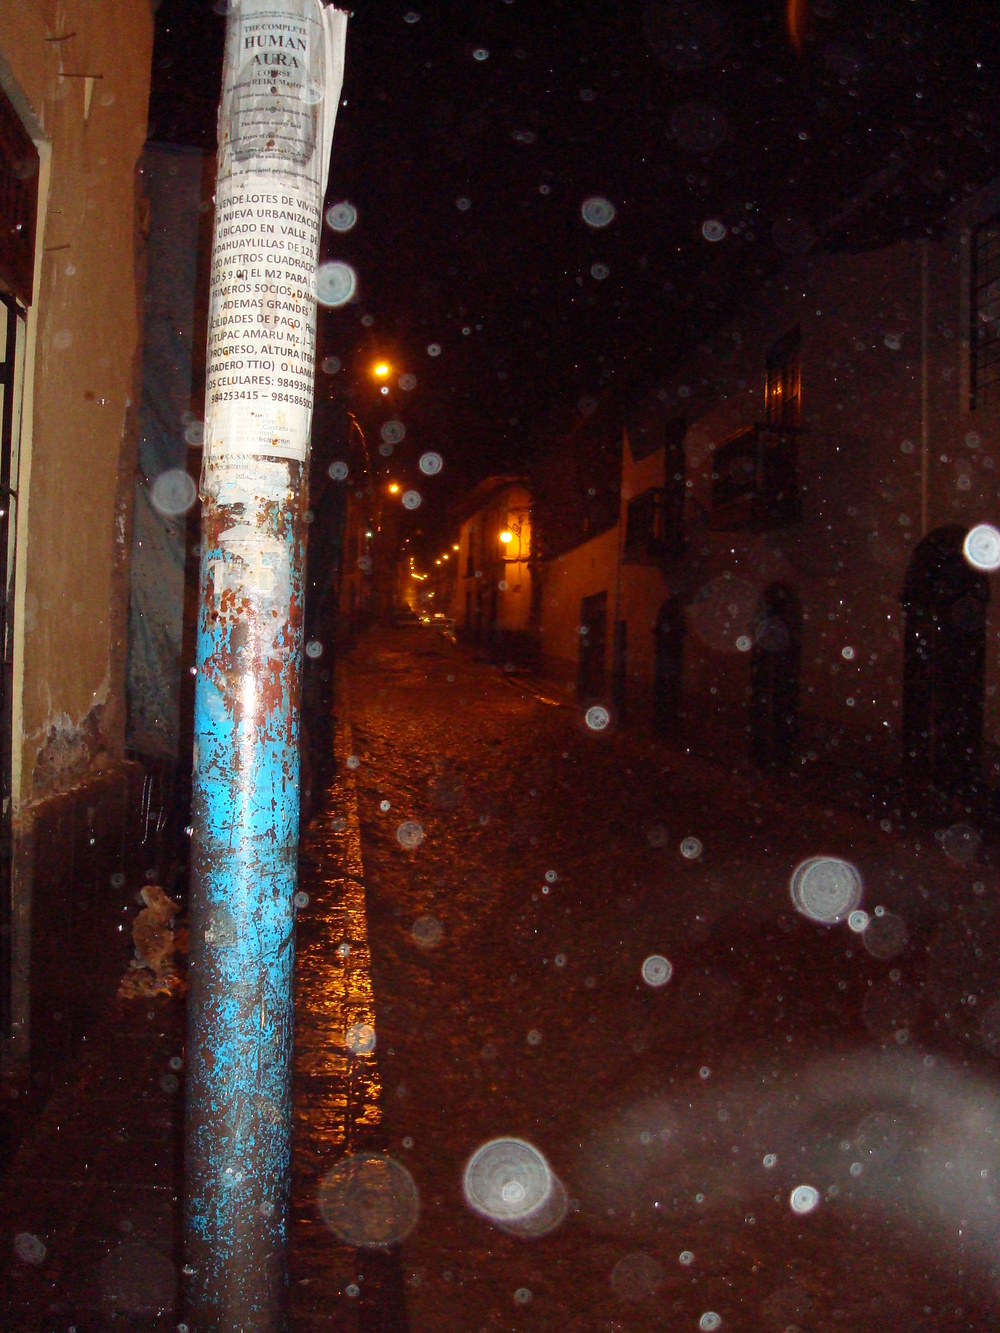  A photo taken by Ami while were both still living down in  Cusco Peru  during my  travel experience  of my  Jaunt Down South 2010. It showcases how during the rainy season in Cusco Peru, the rain really pours down and the streets turn to rivers. During the peak of the rainy season (i.e. December to February) it can have an average of 133.9 inches receiving 401.7 inches of precipitation of the expected annual 707.8 inches per year in just those three months. Read the Wikipedia Article for more information regarding  Cusco’s climate .